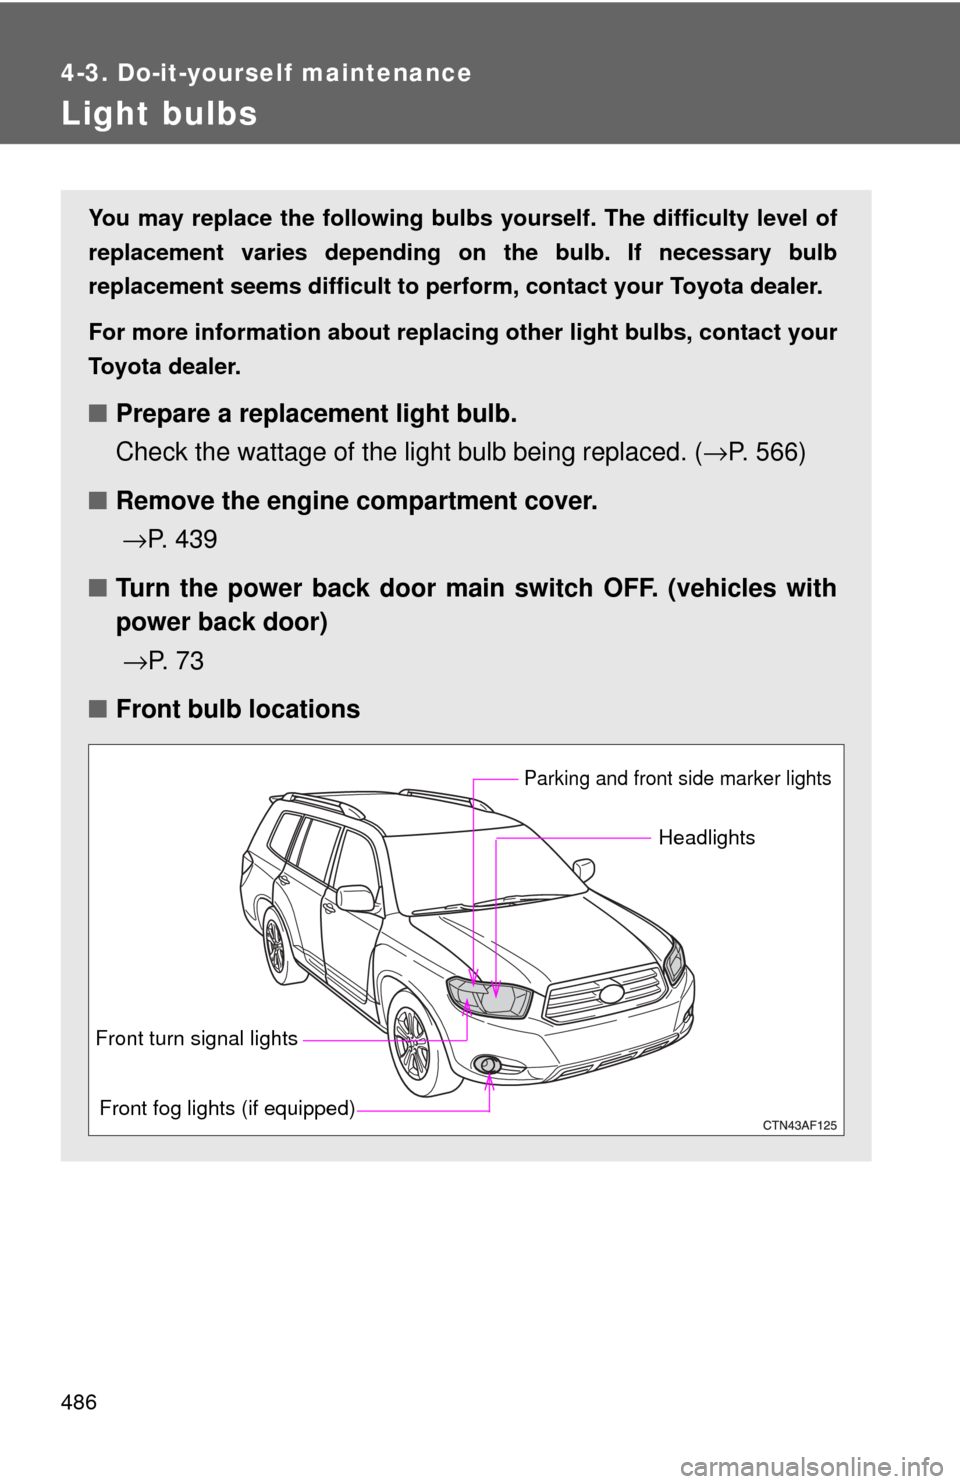 TOYOTA HIGHLANDER 2009 XU40 / 2.G Owners Manual 486
4-3. Do-it-yourself maintenance
Light bulbs
You may replace the following bulbs yourself. The difficulty level of
replacement varies depending on the bulb. If necessary bulb
replacement seems diff